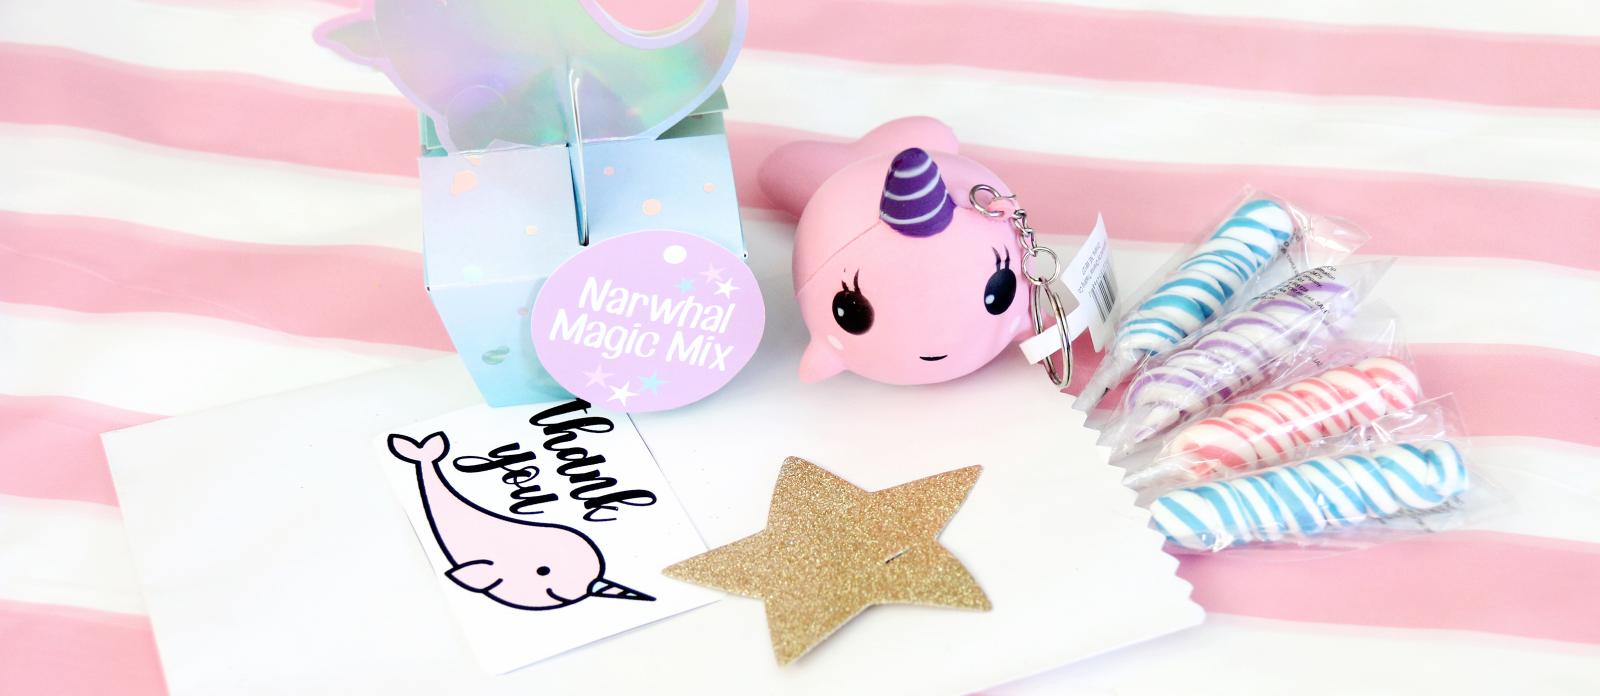 Narwhal Birthday Party Favours Loot Idea Narwhal Stickers x 5 Whale Stickers